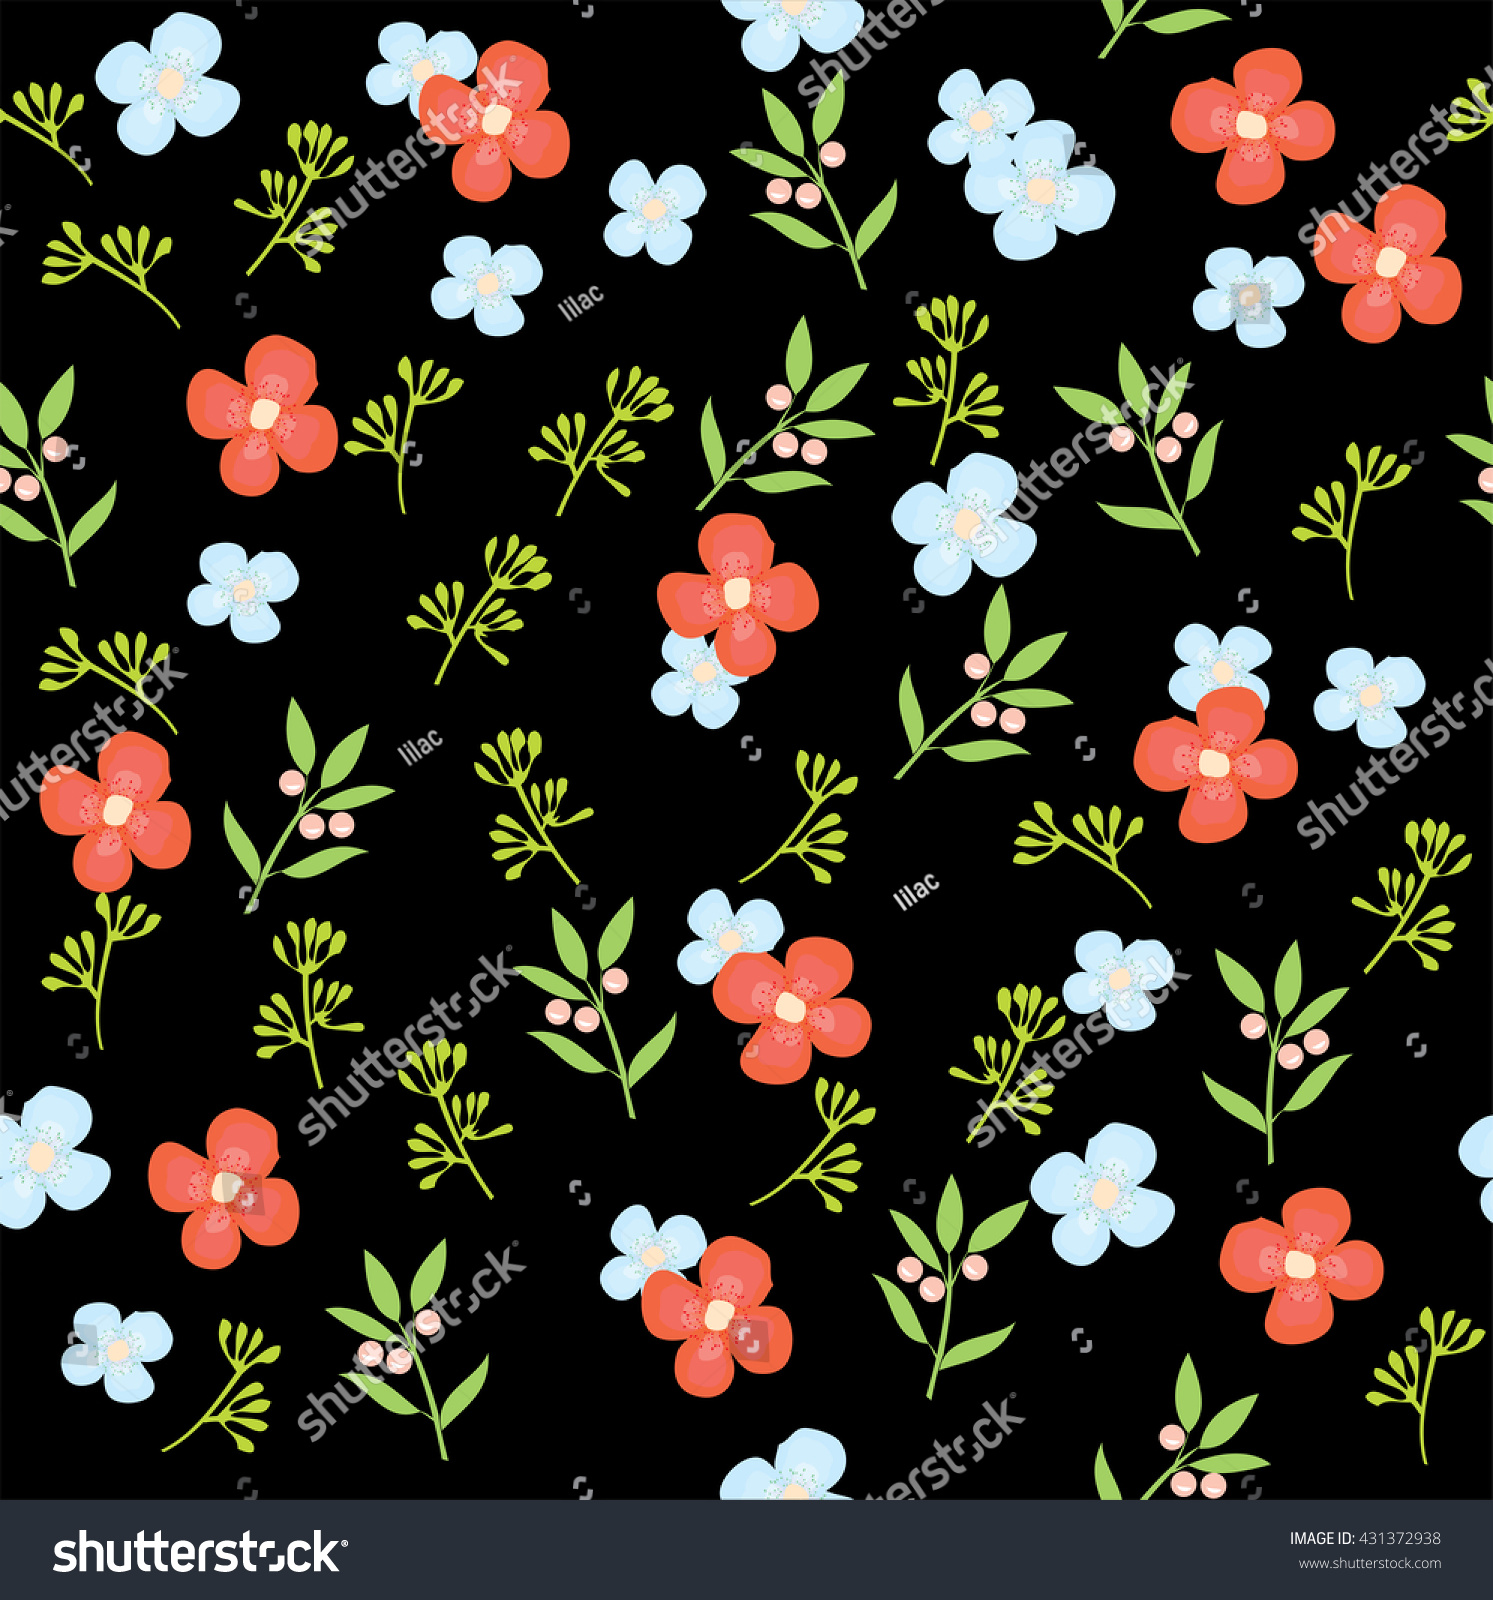 Vector Illustration Floral Seamless Background Stock Vector 431372938 ...